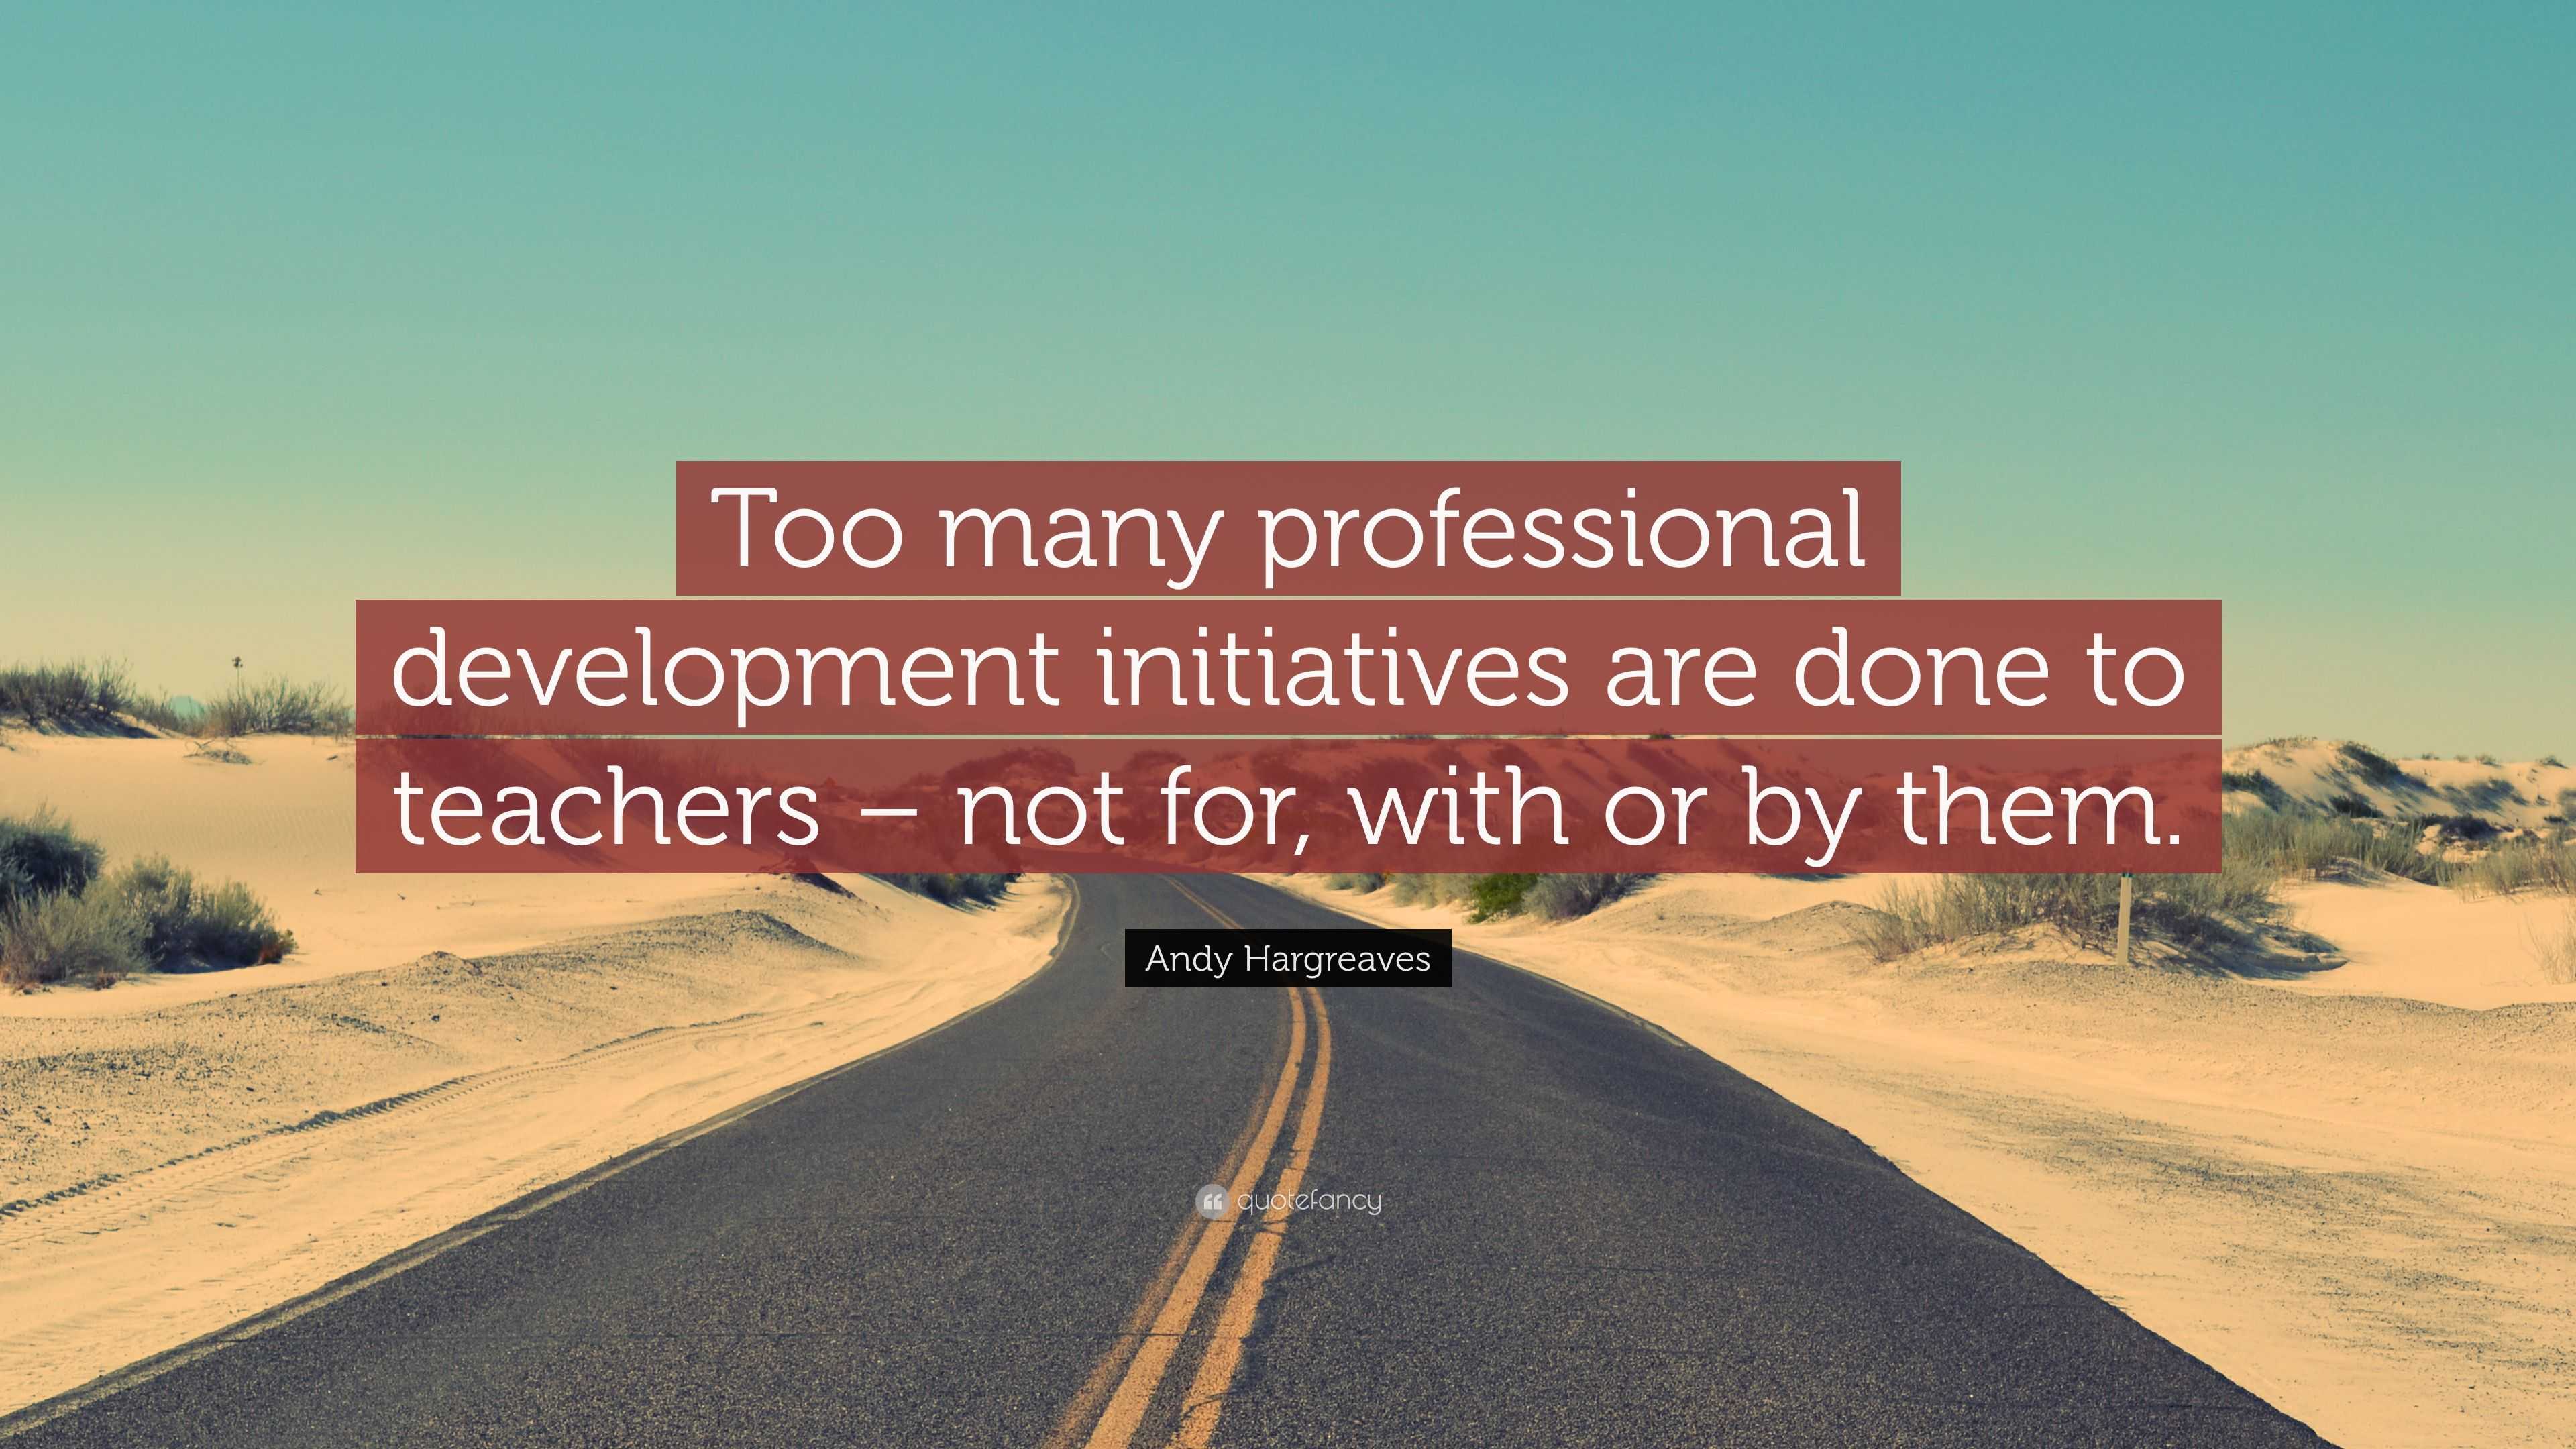 Andy Hargreaves Quote “Too many professional development